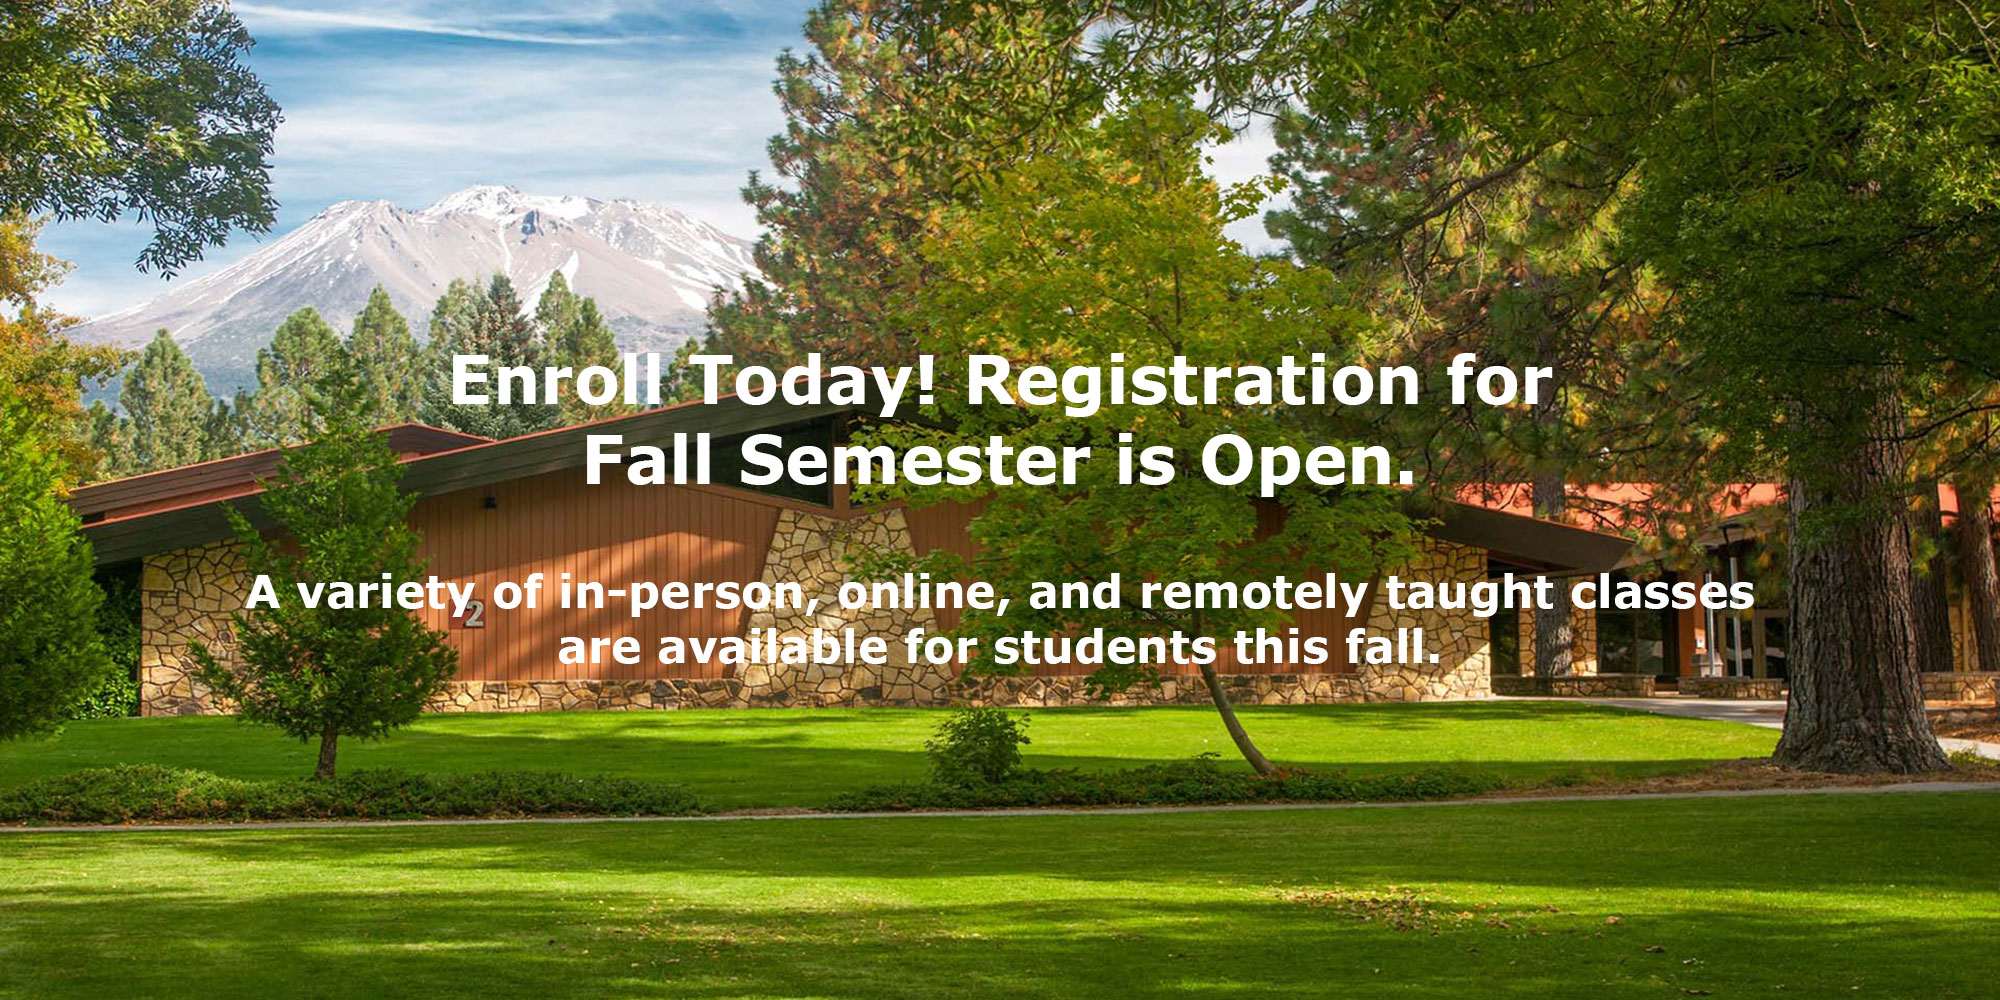 Enroll Today! Registration for Fall Semester is Open. A variety of in-person, online, and remotely taught classes are available for students this fall.